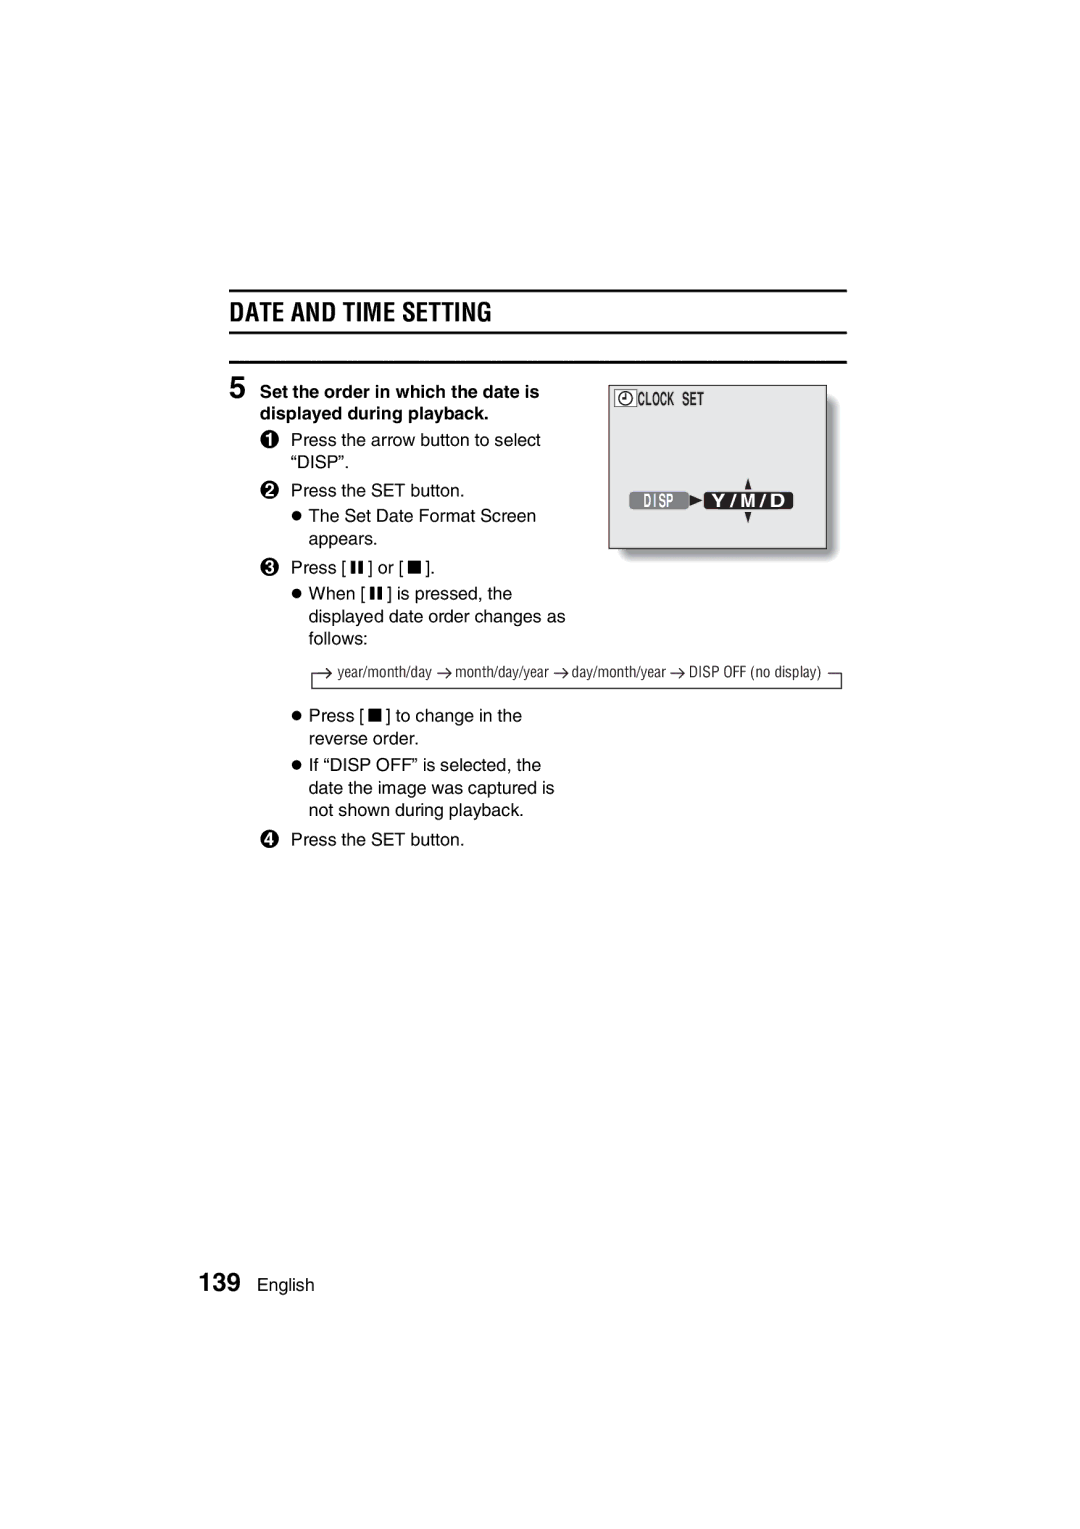 Sanyo VPC-J1EX instruction manual Date and Time Setting, Set the order in which the date is displayed during playback 